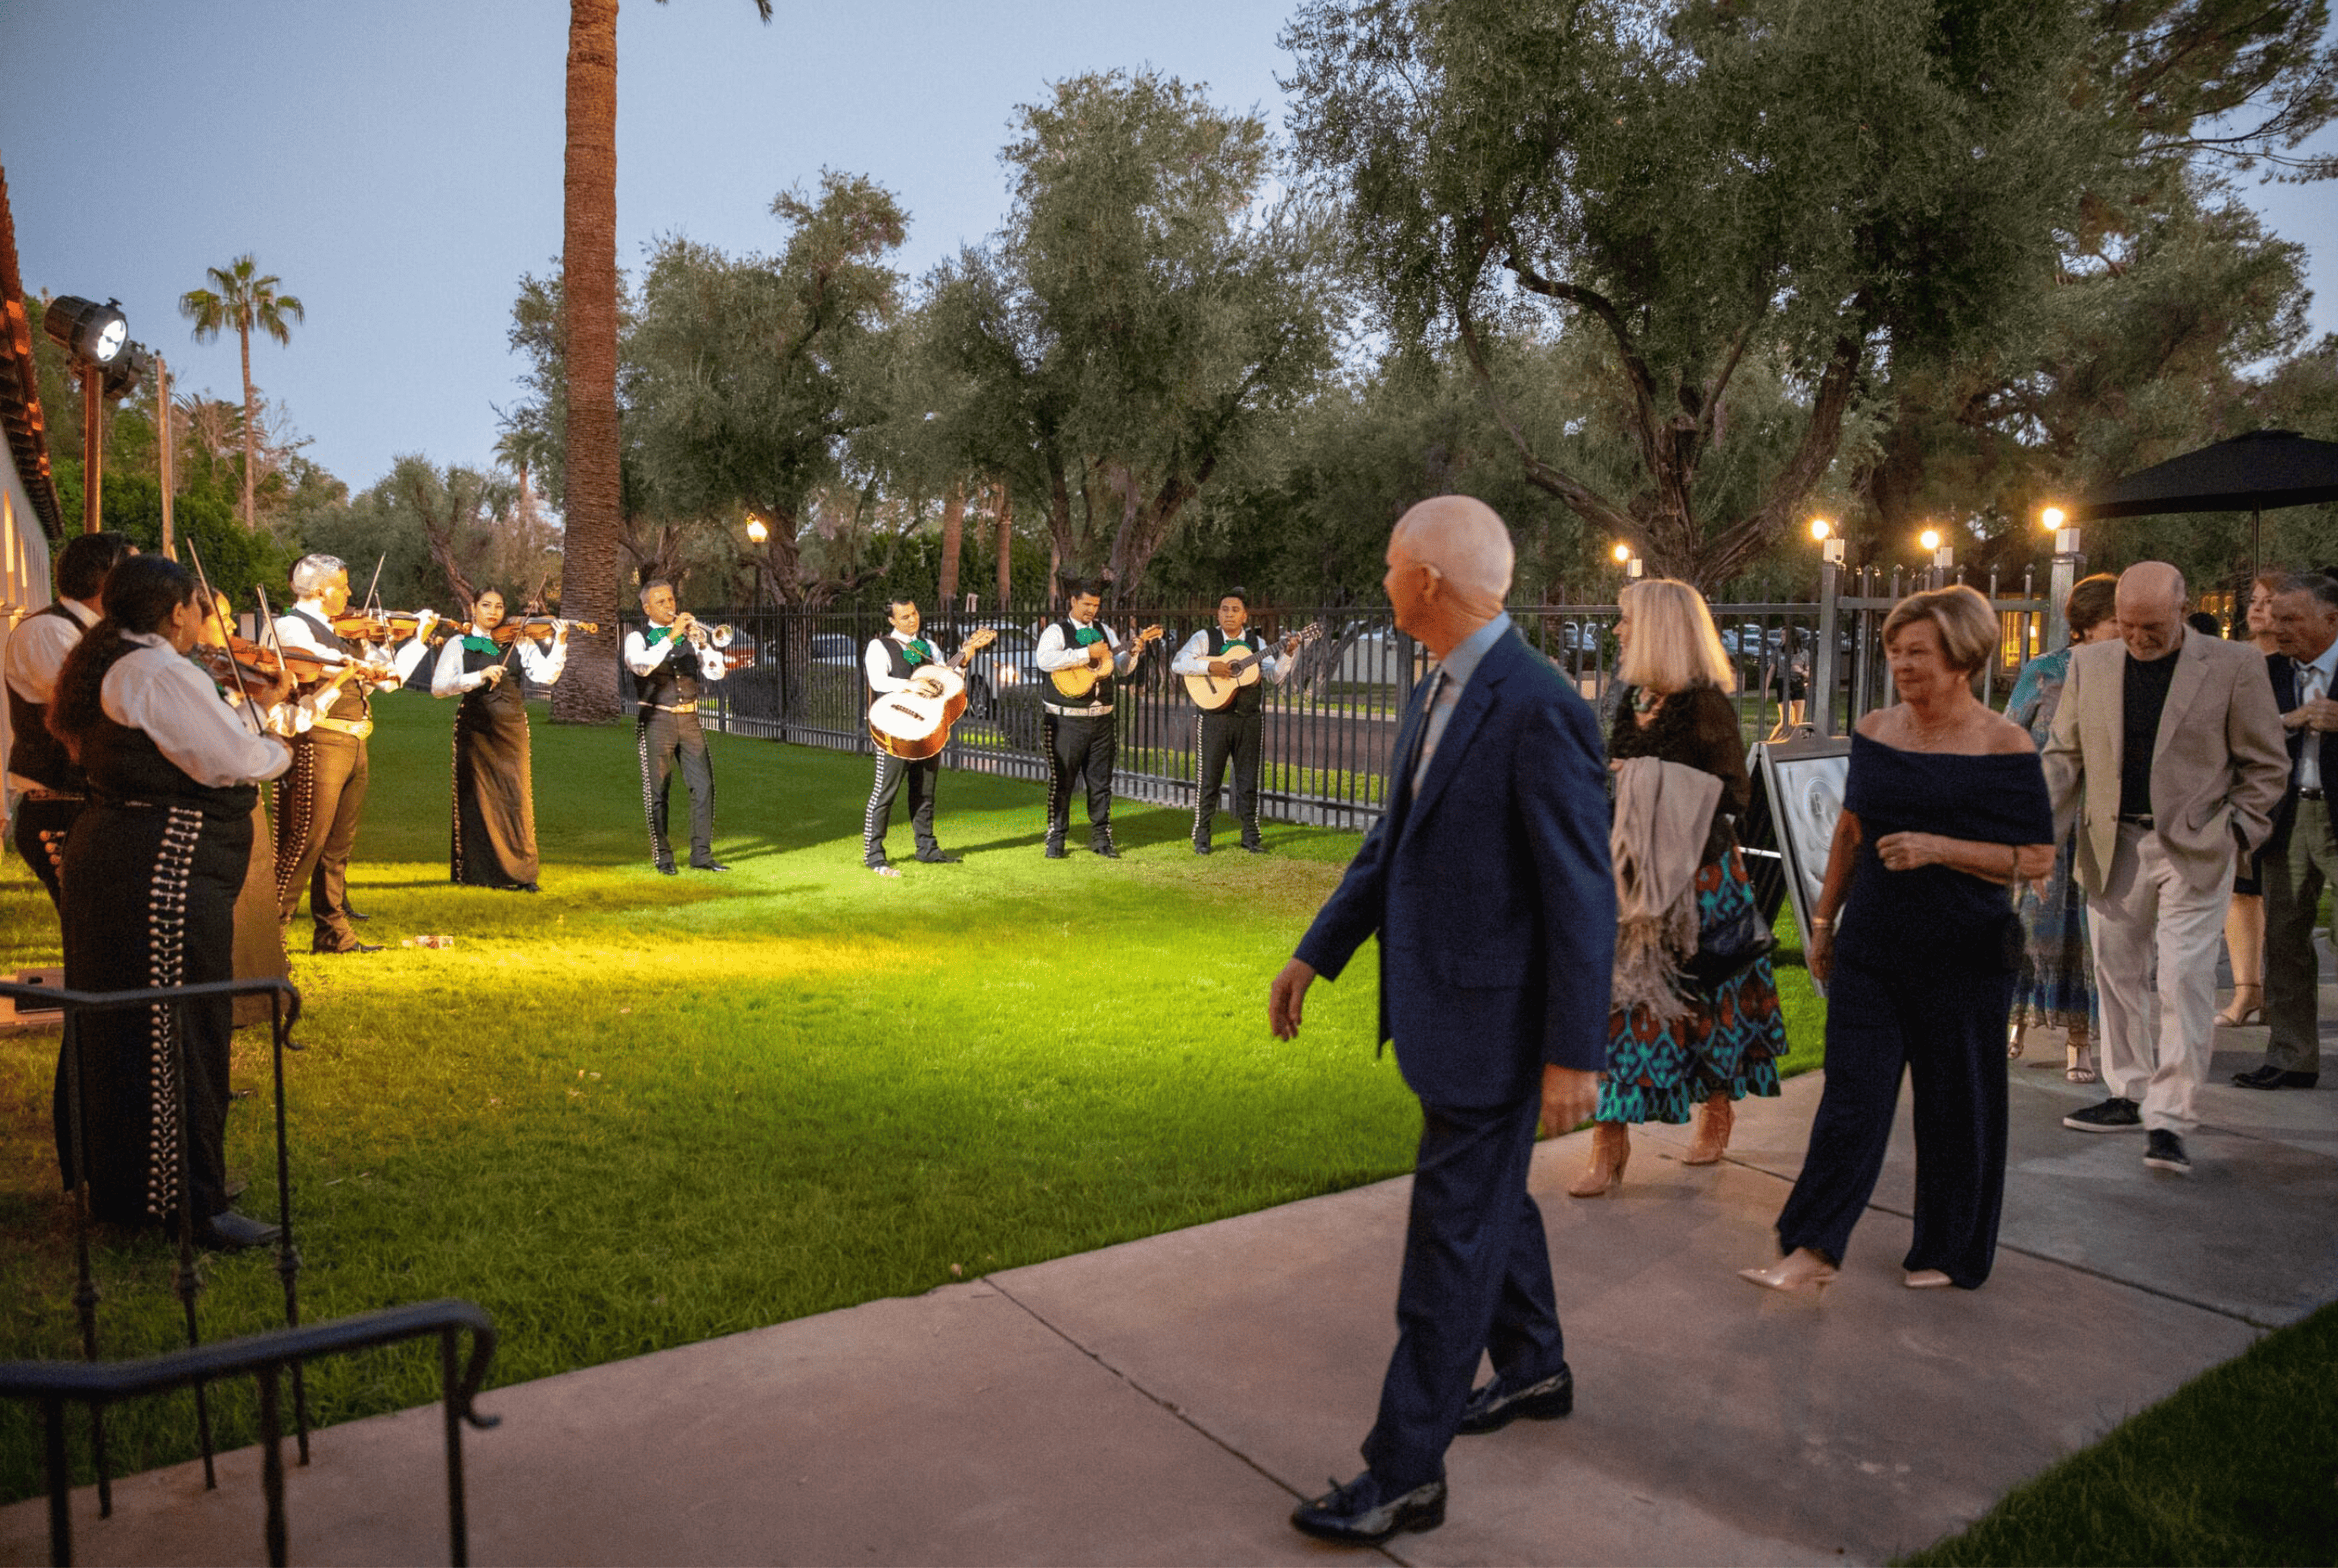 Guests arriving at an outdoor evening event with a mariachi band playing under a moondance.